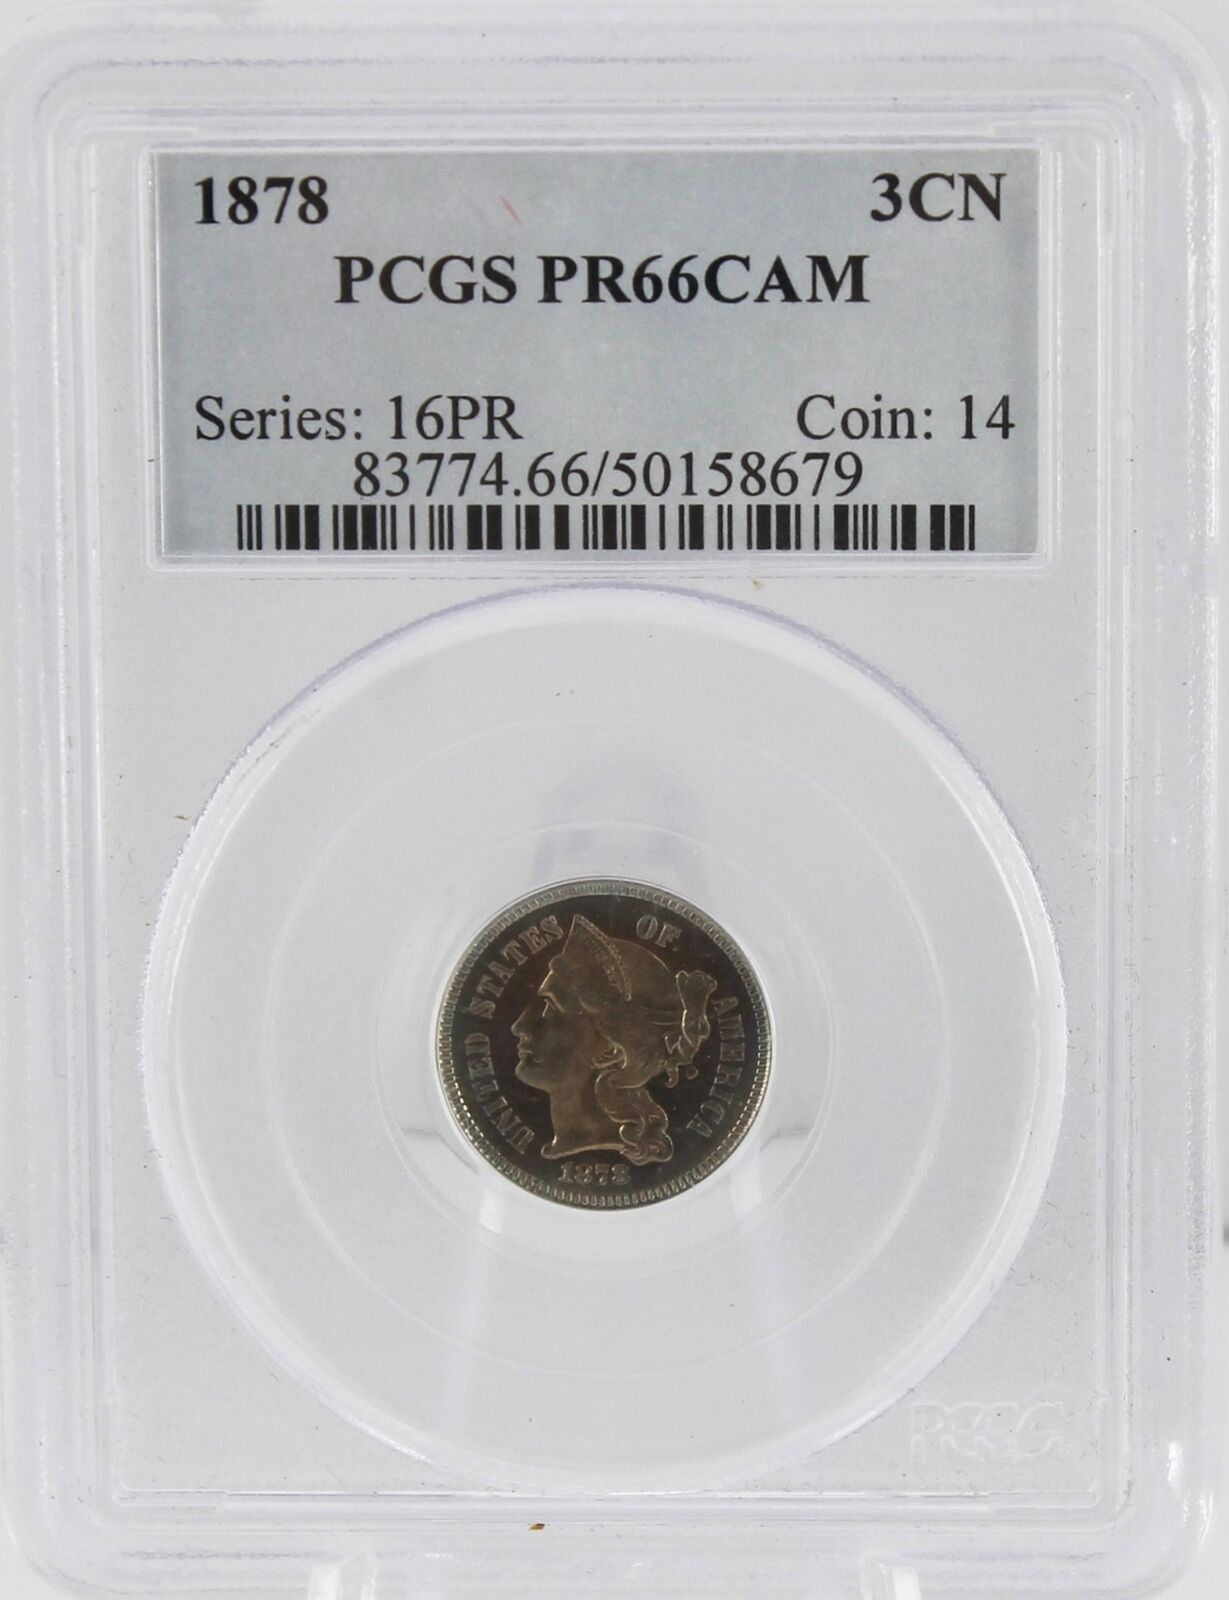 Proof Us 1878 3 Three Cent Nickel Trime Pcgs Pf66cam 3cn Coin C Cameo Graded